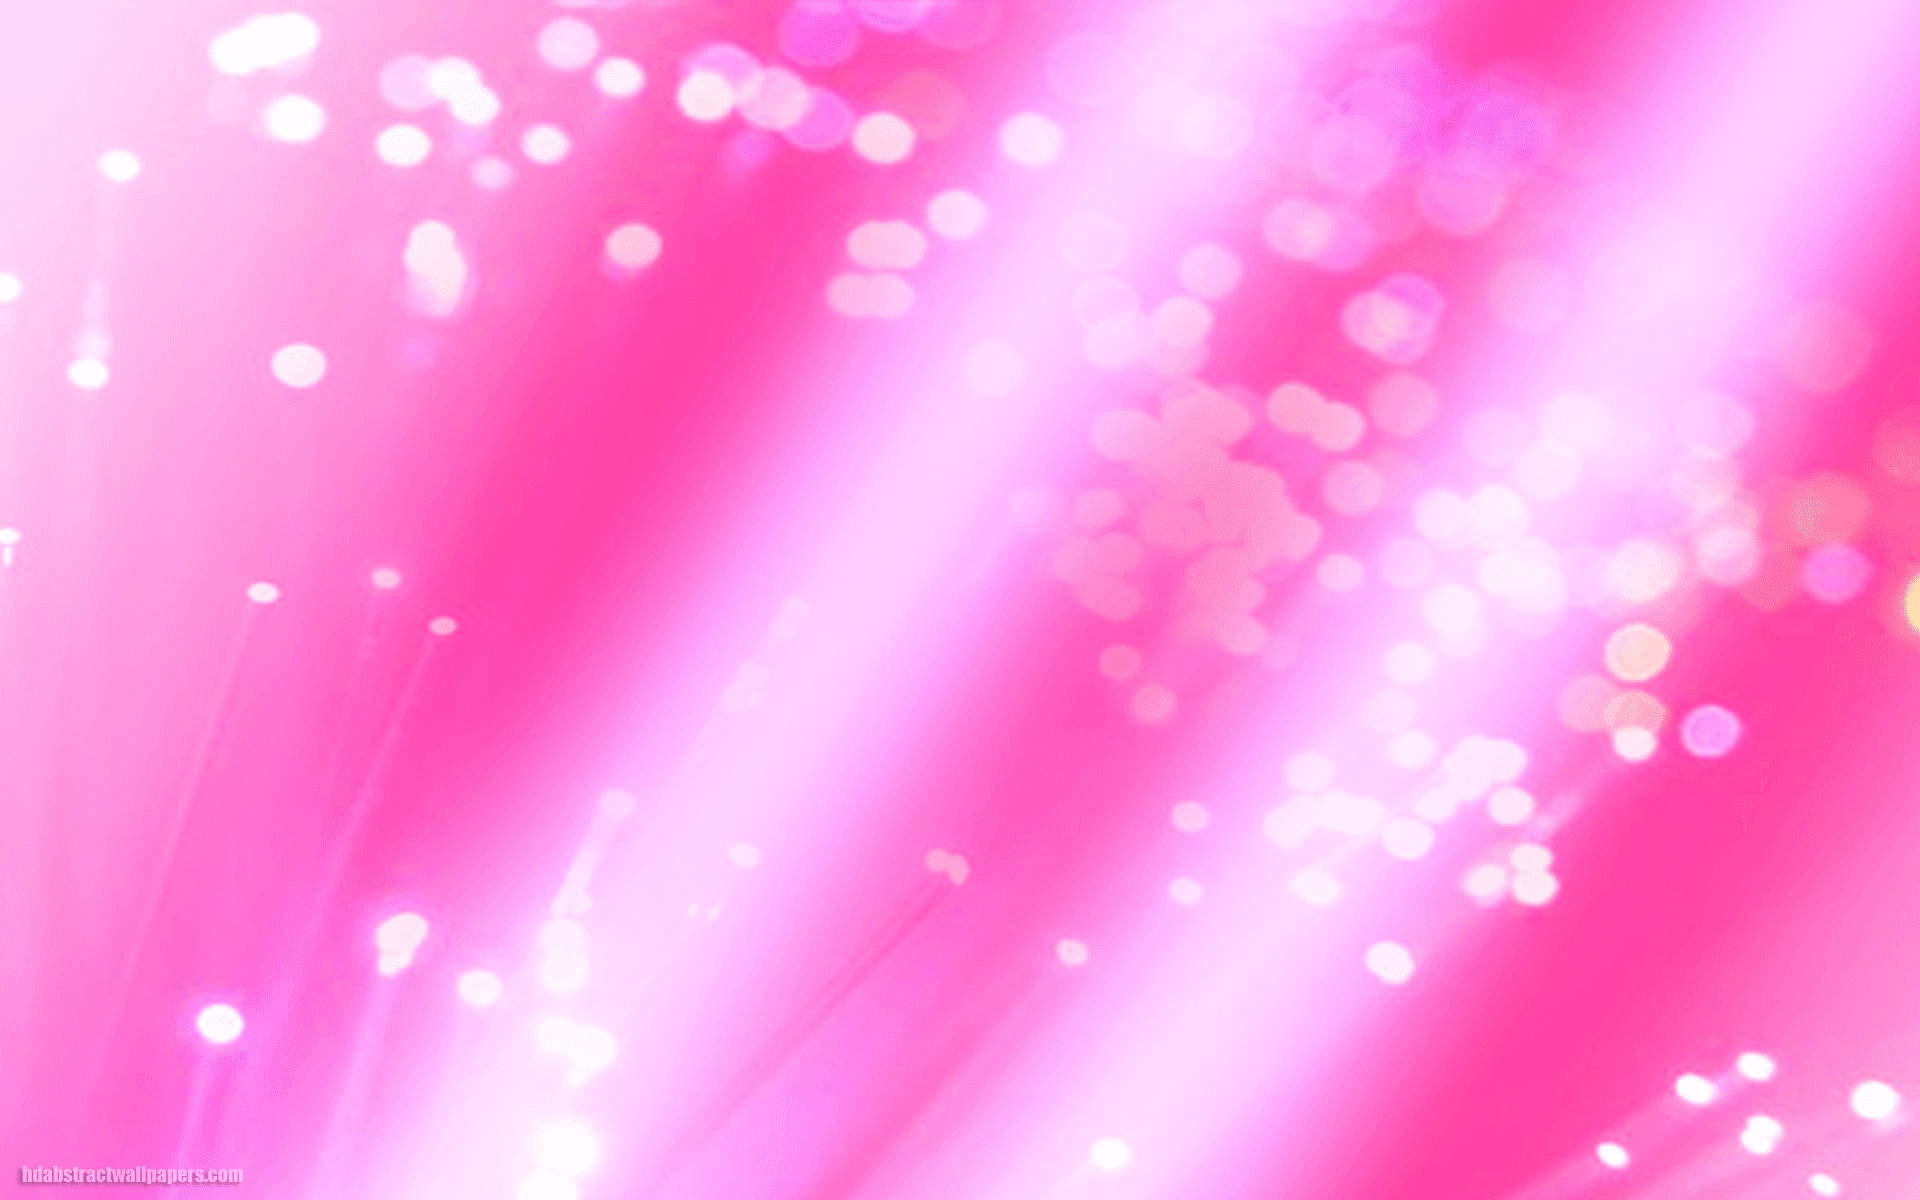 1920x1200 Pink abstract wallpaper with lights and circles